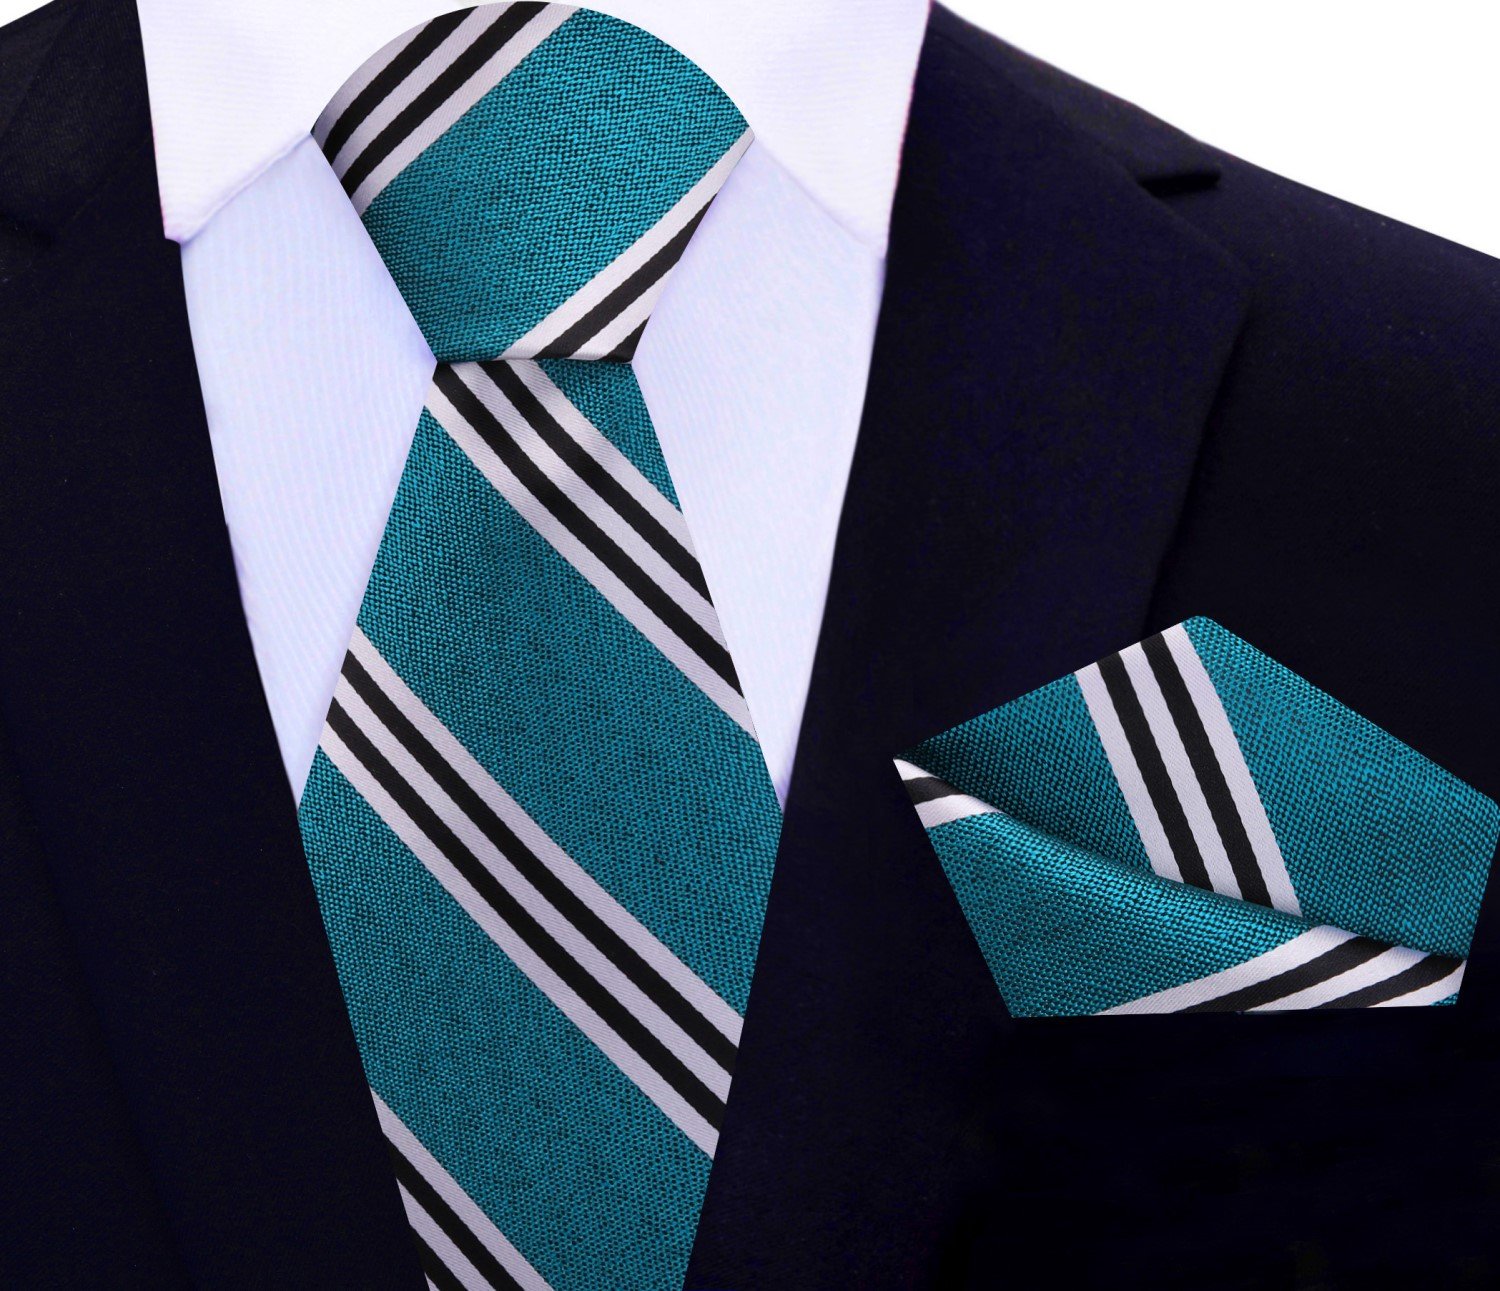 Main View: Teal, White, Black Stripe Tie and Square